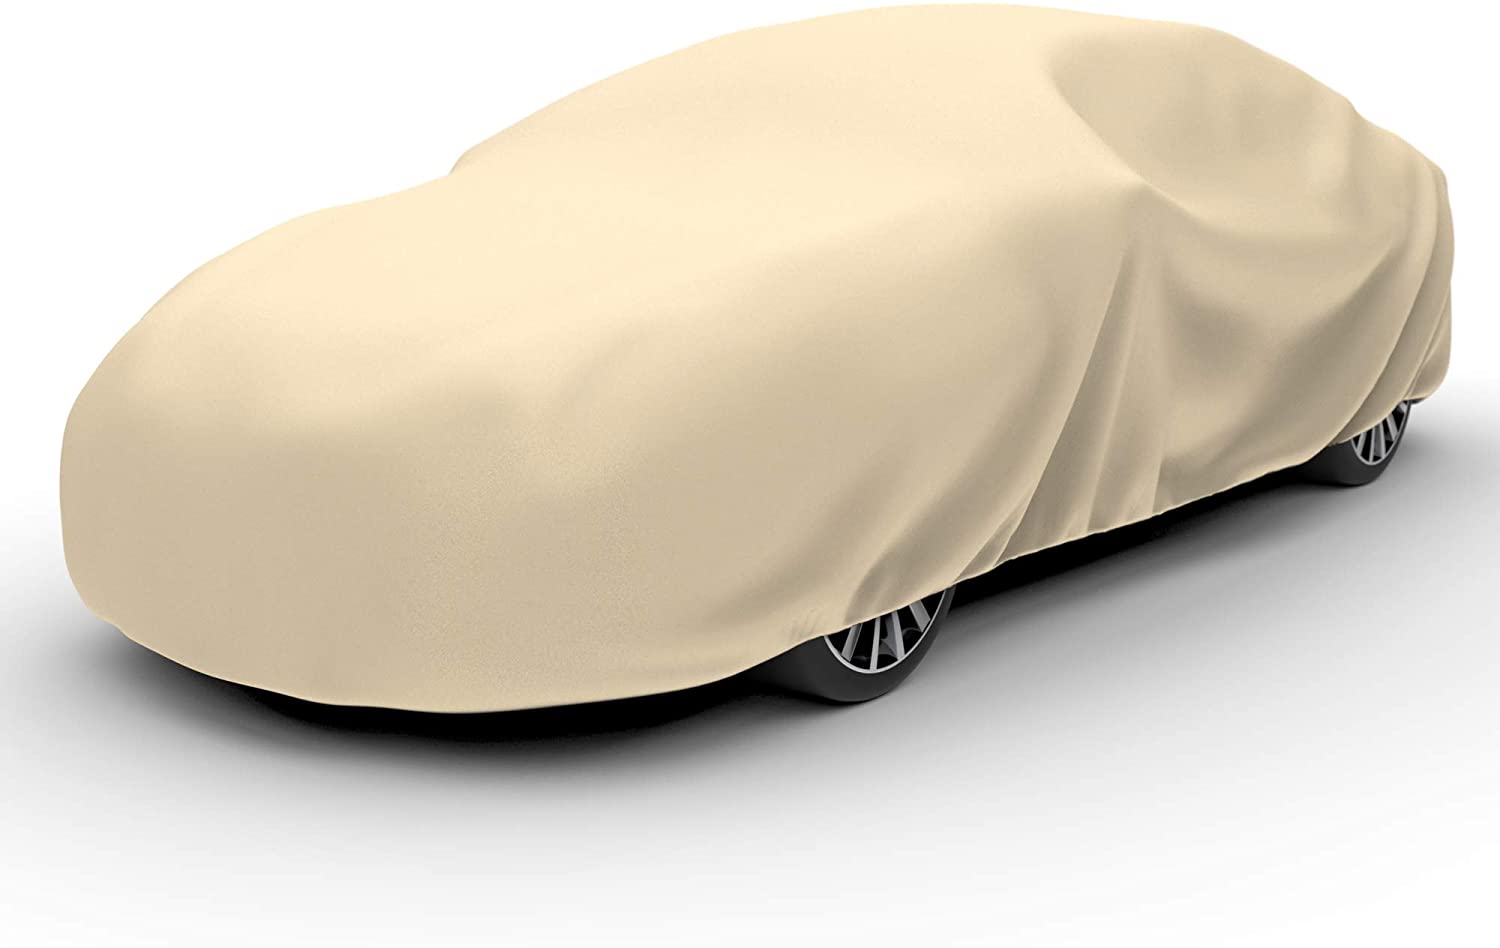 Budge Best outdoor car cover for winter